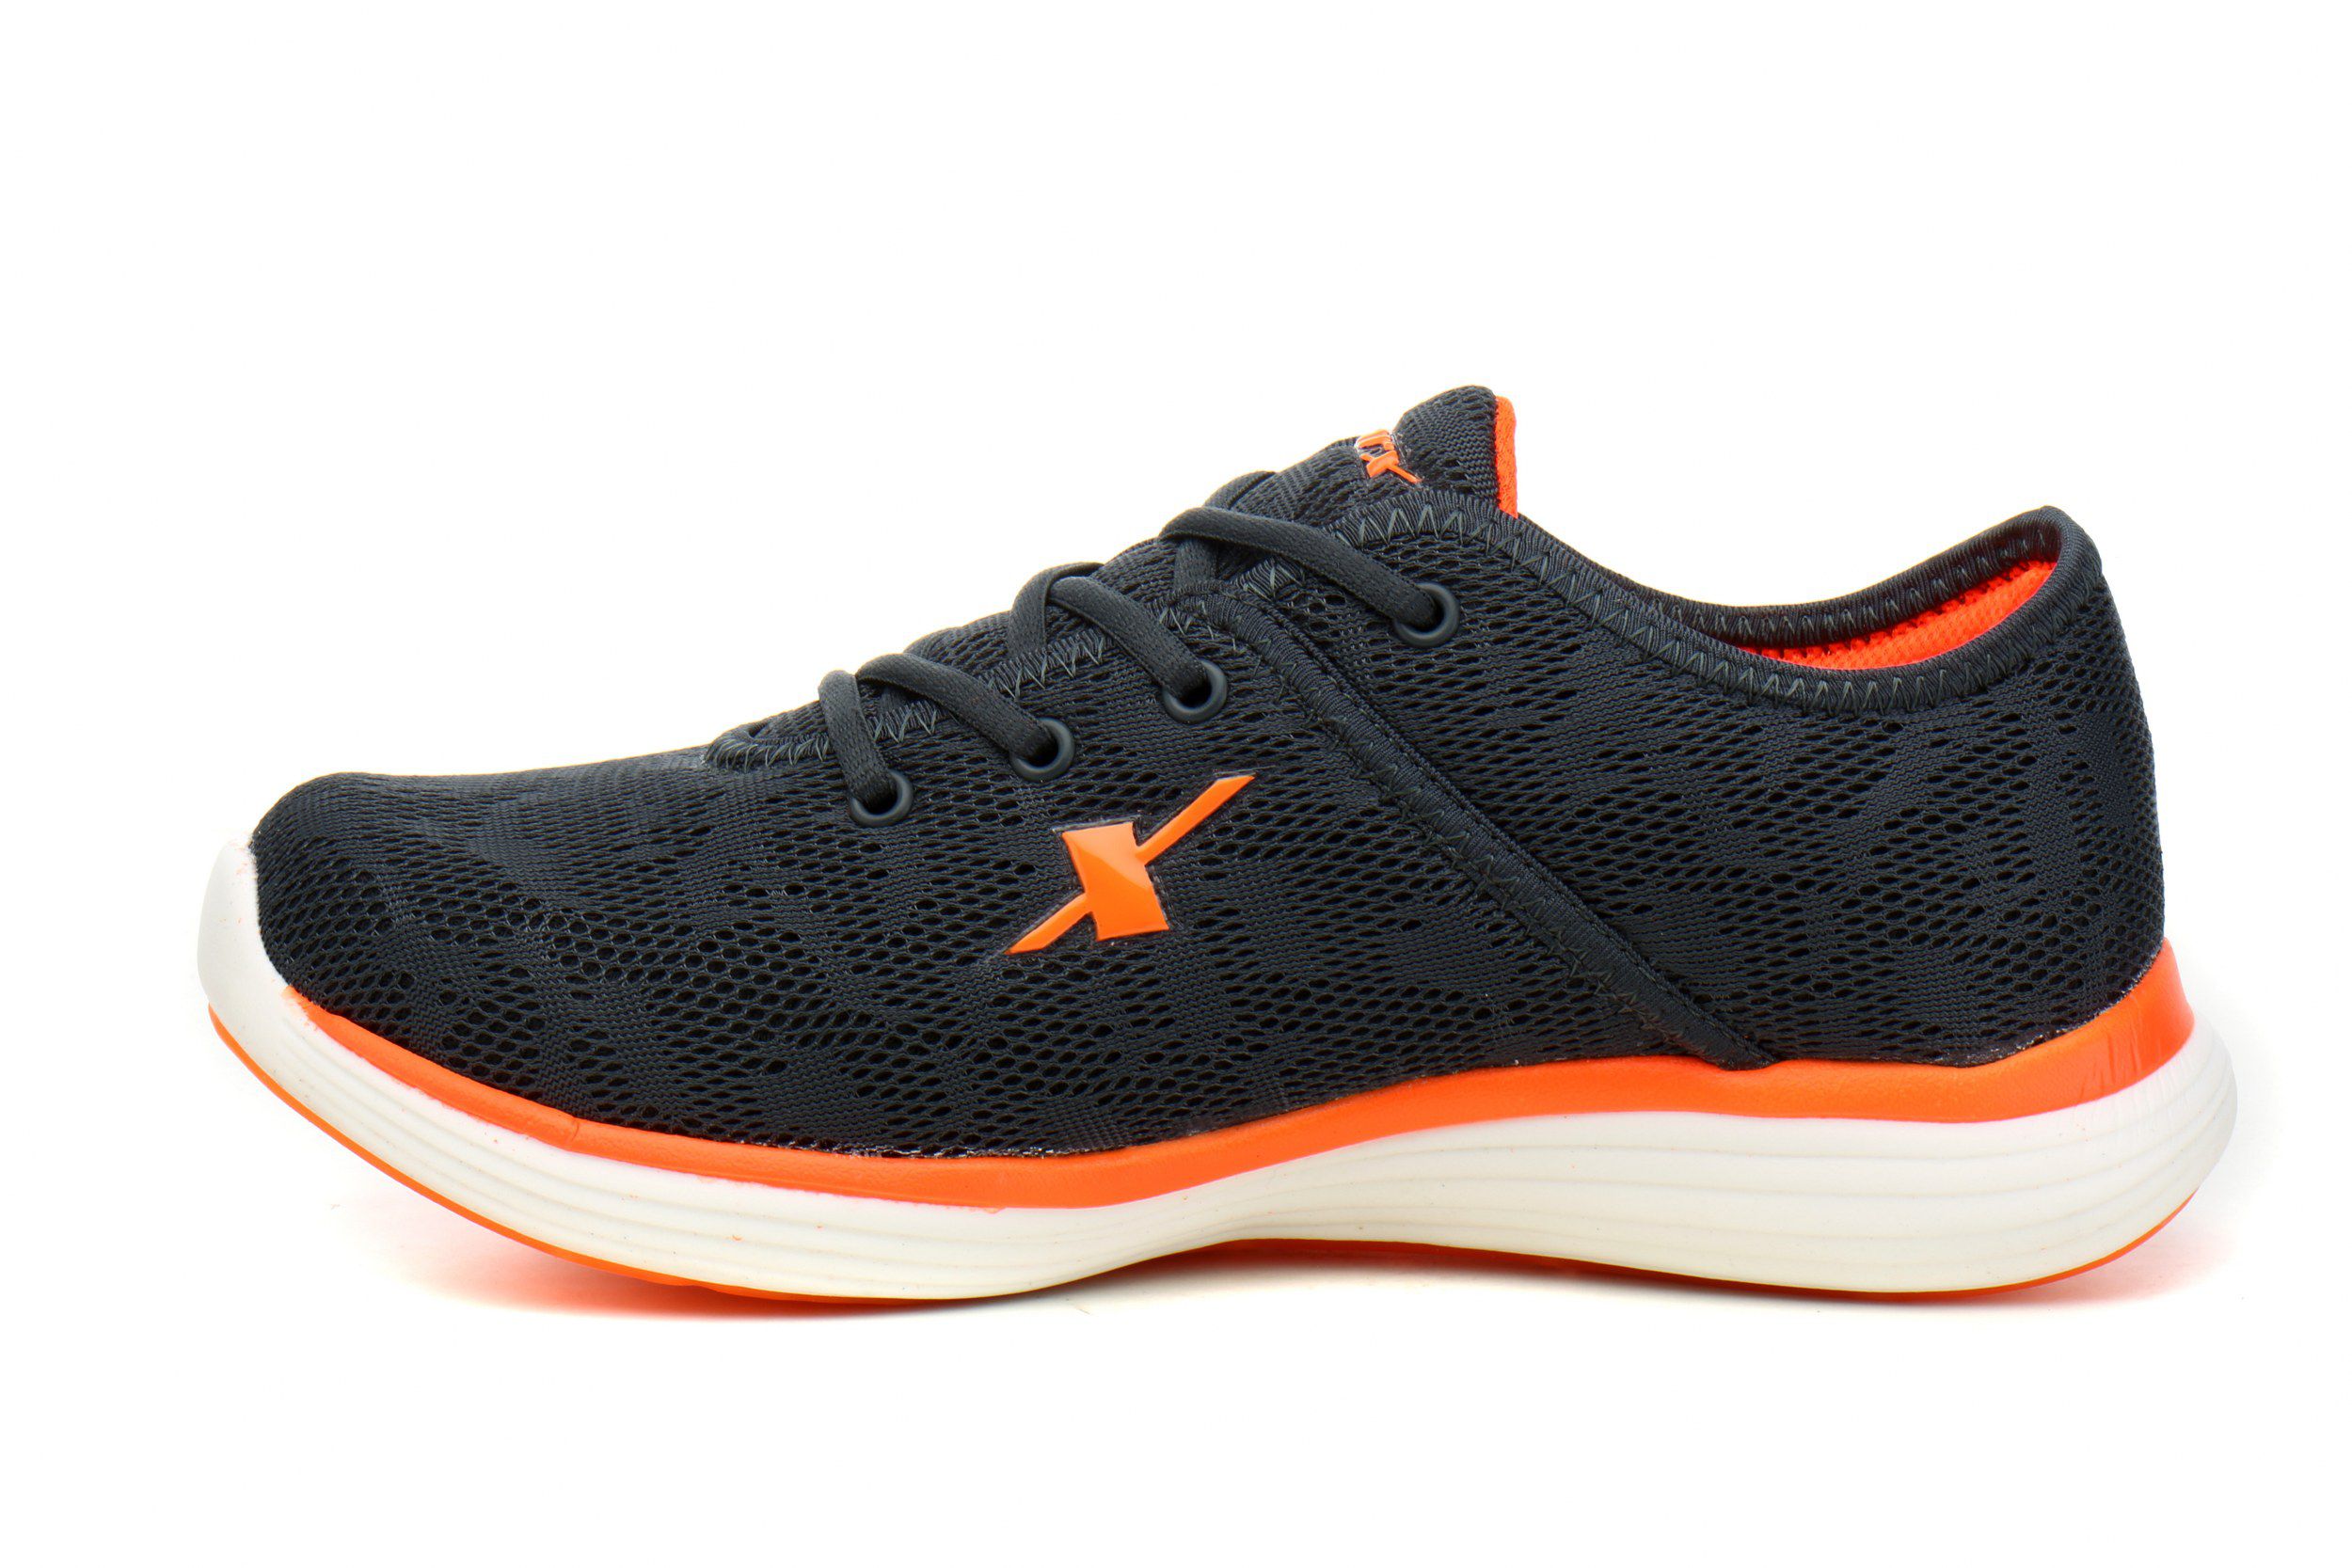 Sparx Gray Running Shoes - Buy Sparx Gray Running Shoes Online at Best ...